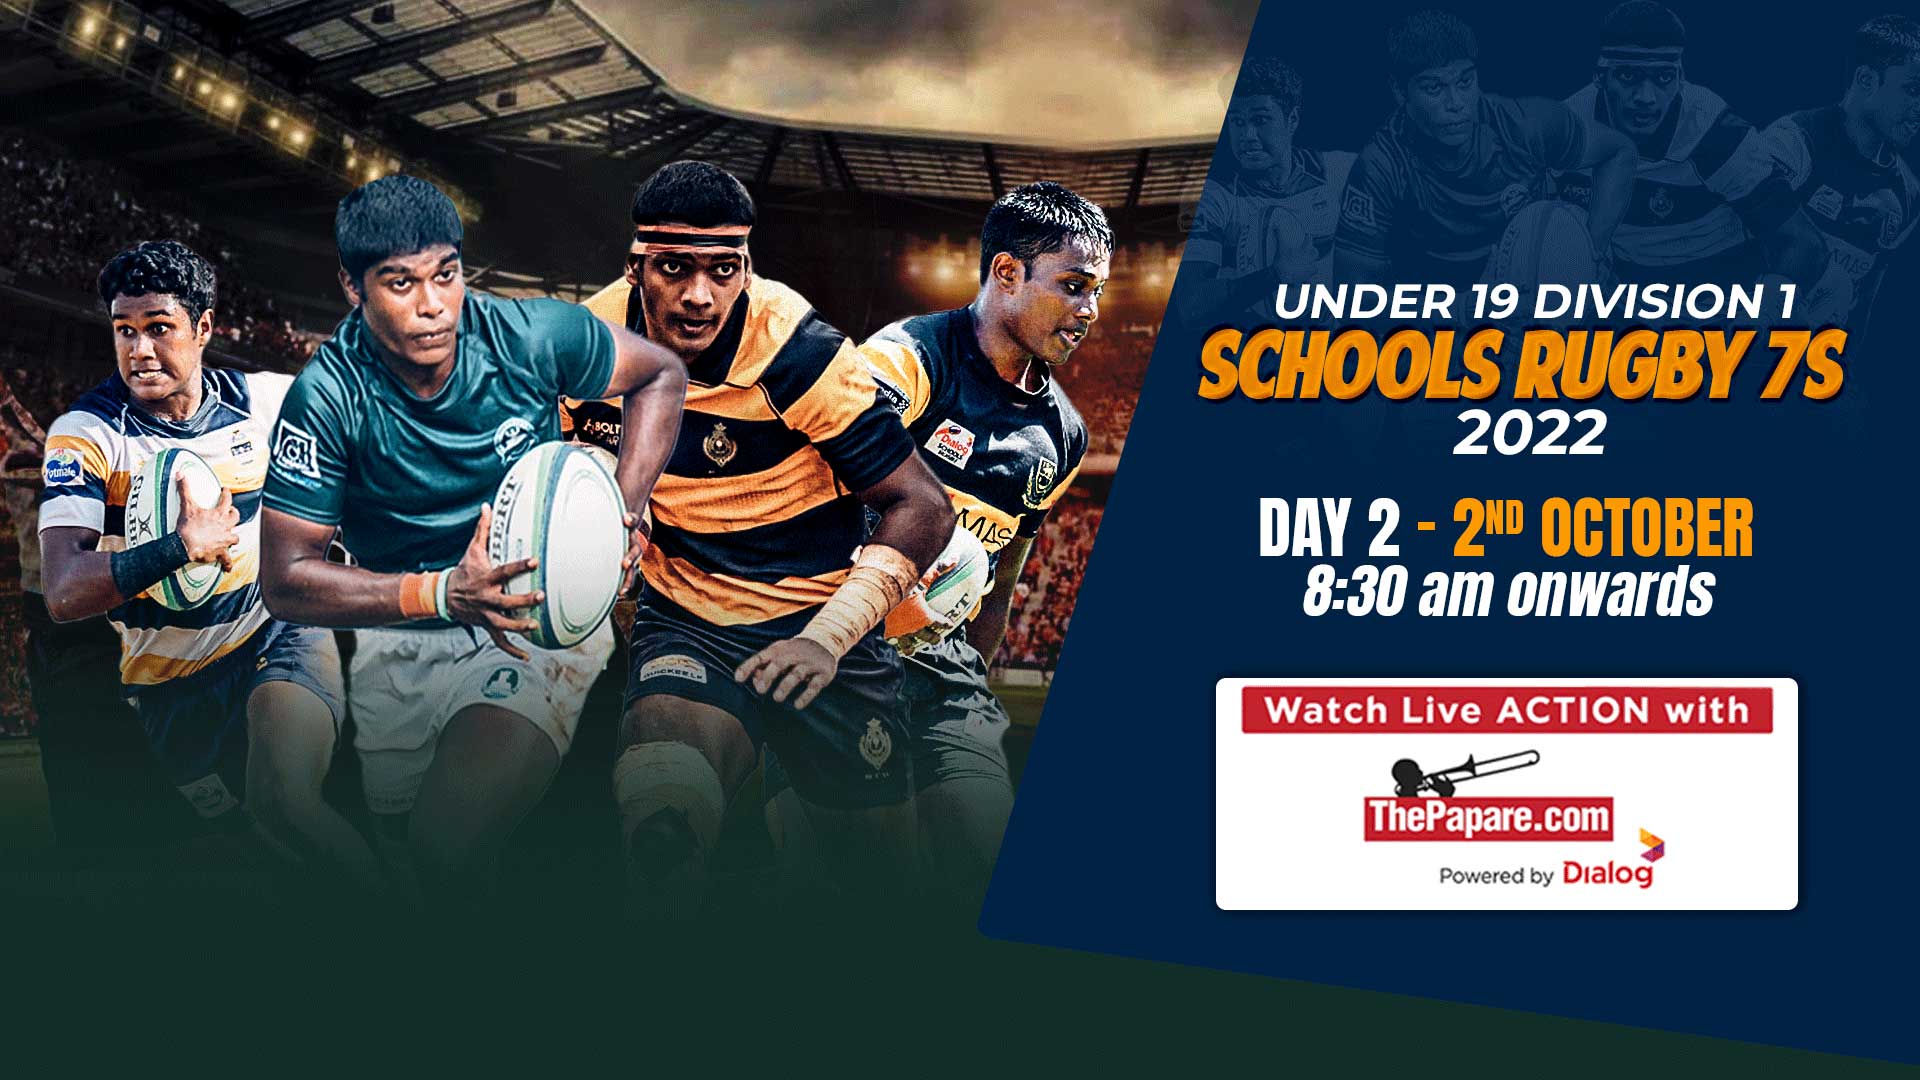 REPLAY - Under 19 Division 1 Schools Rugby 7s